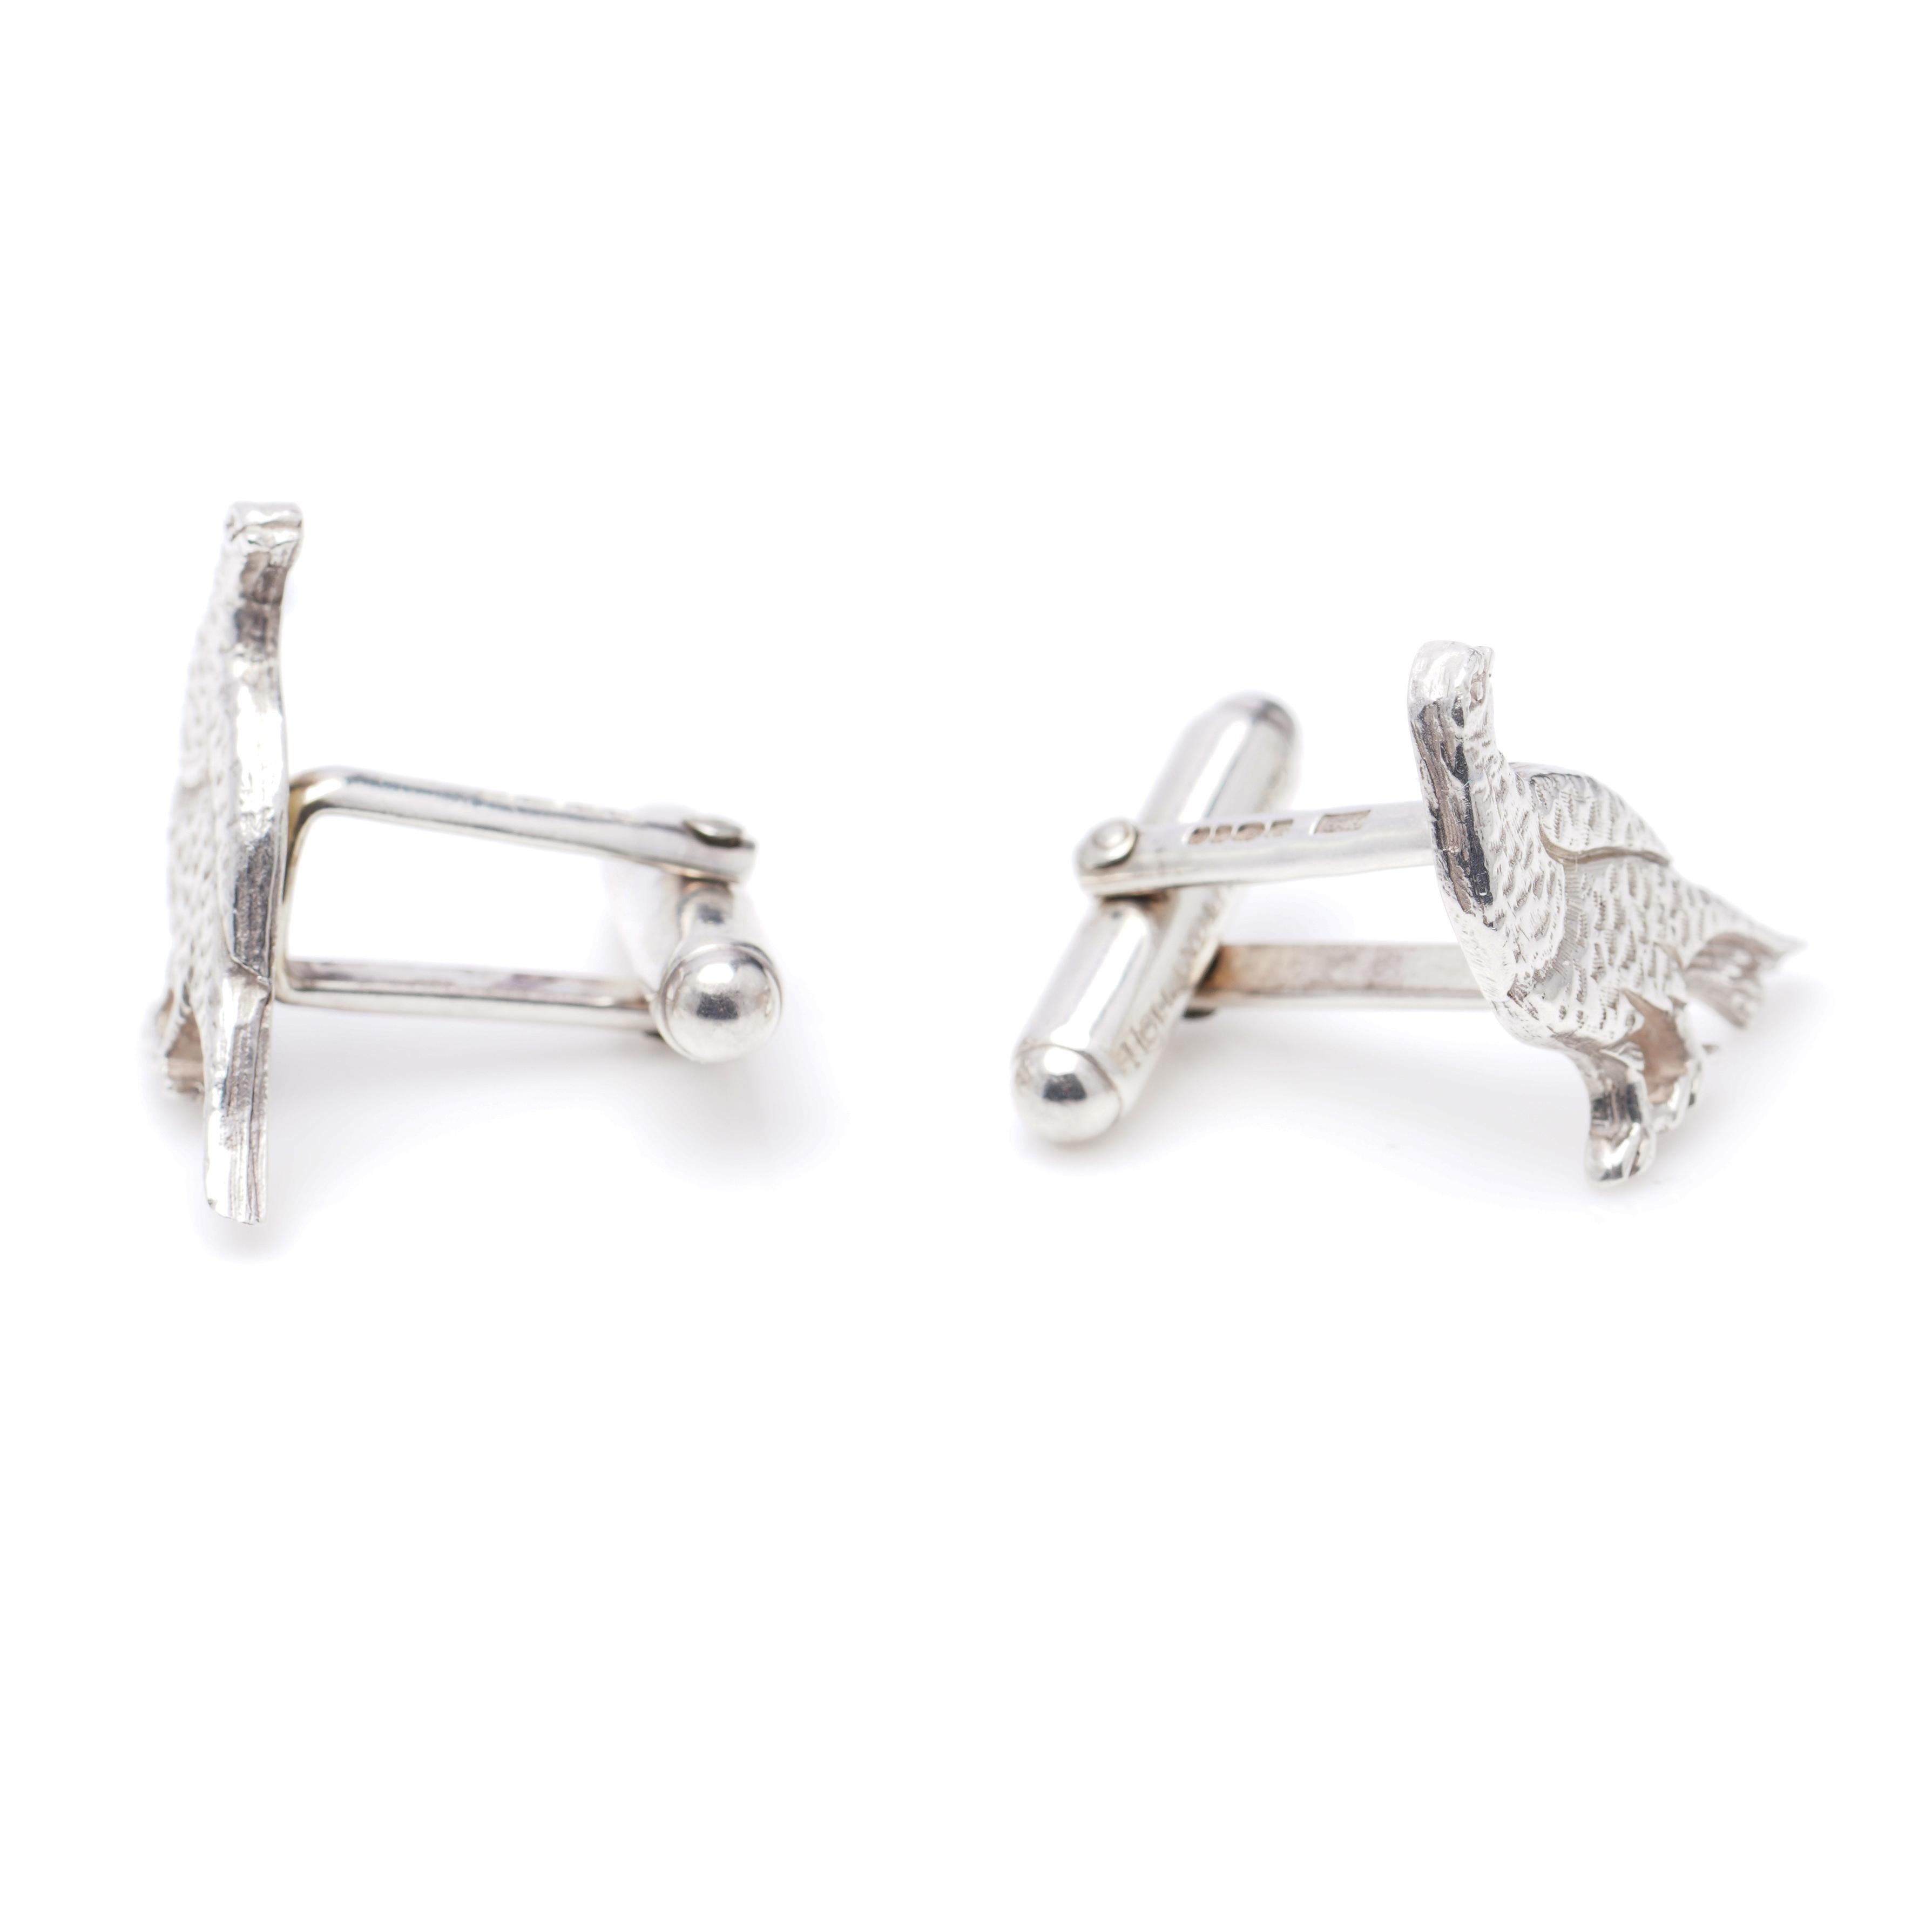 Holland & Holland Sterling Silver Pair of Pheasant Cufflinks 4